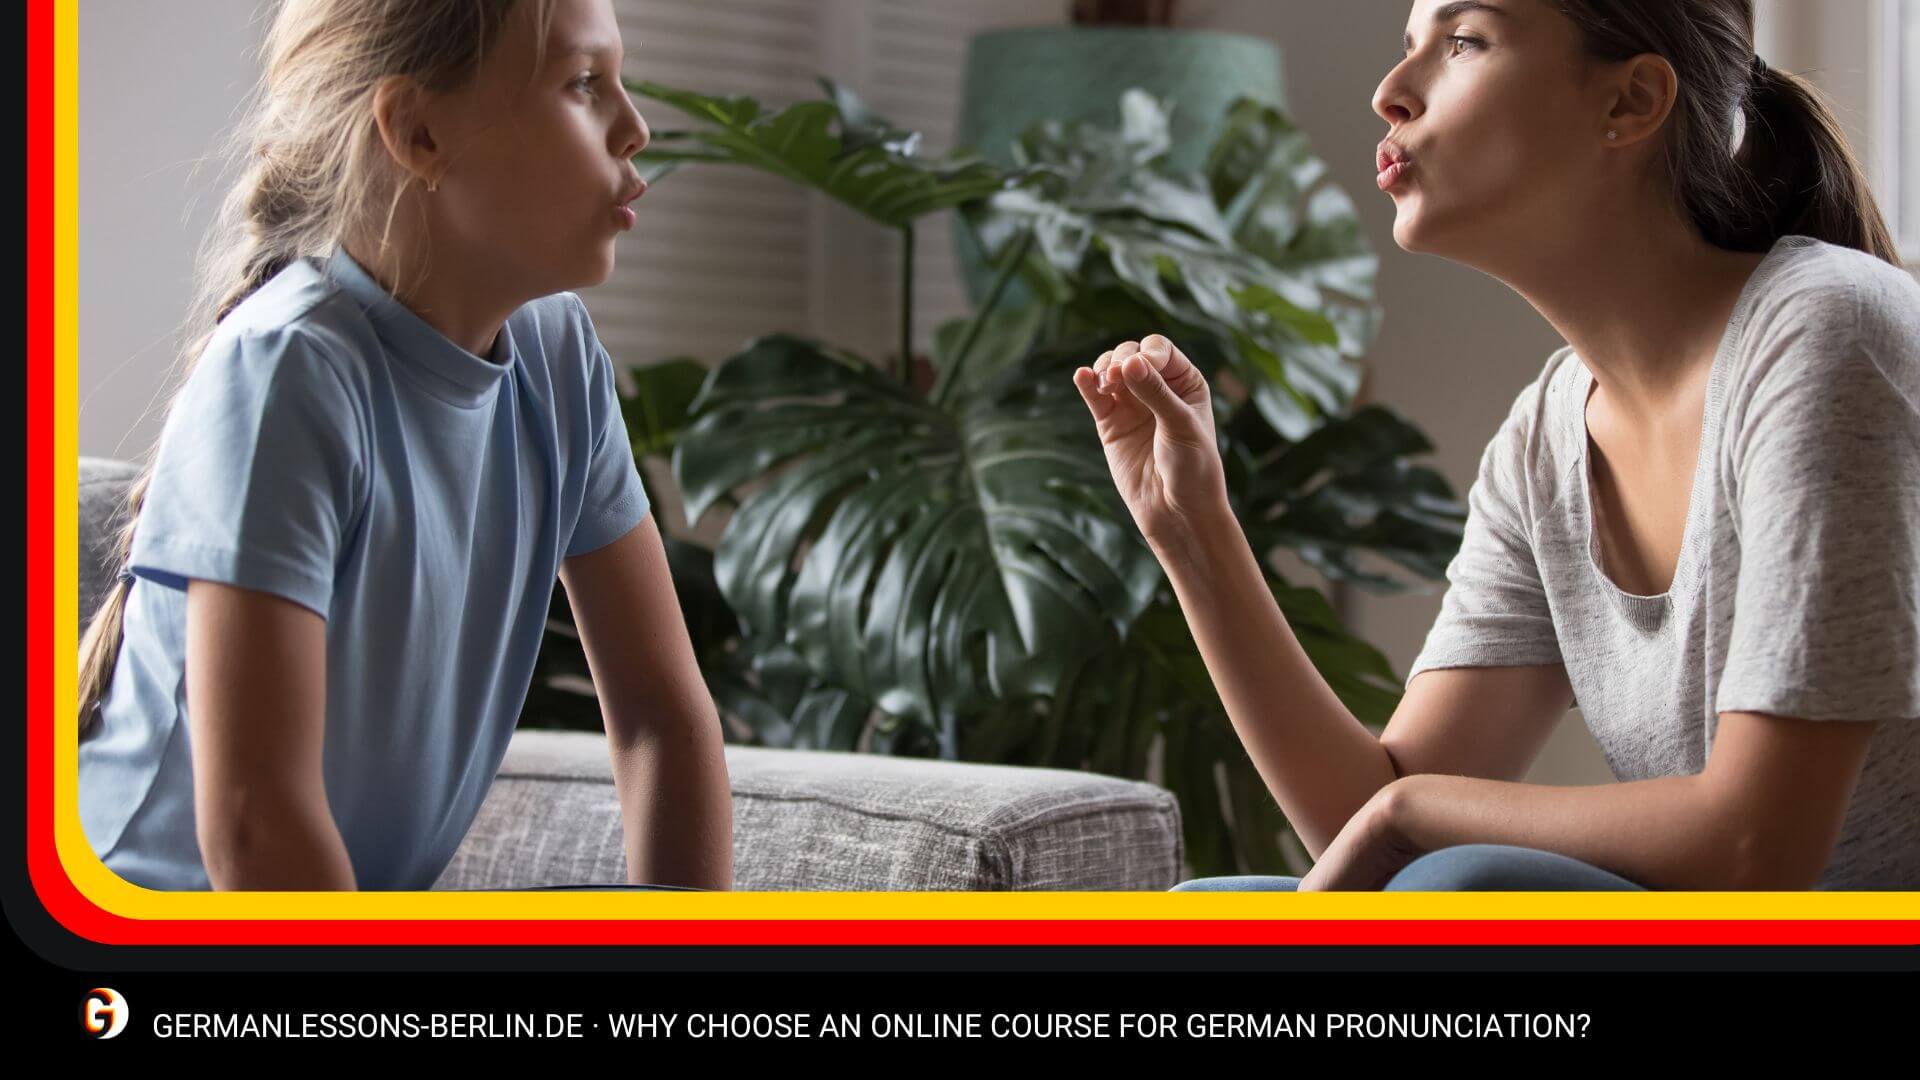 Why Choose an Online Course for German Pronunciation?